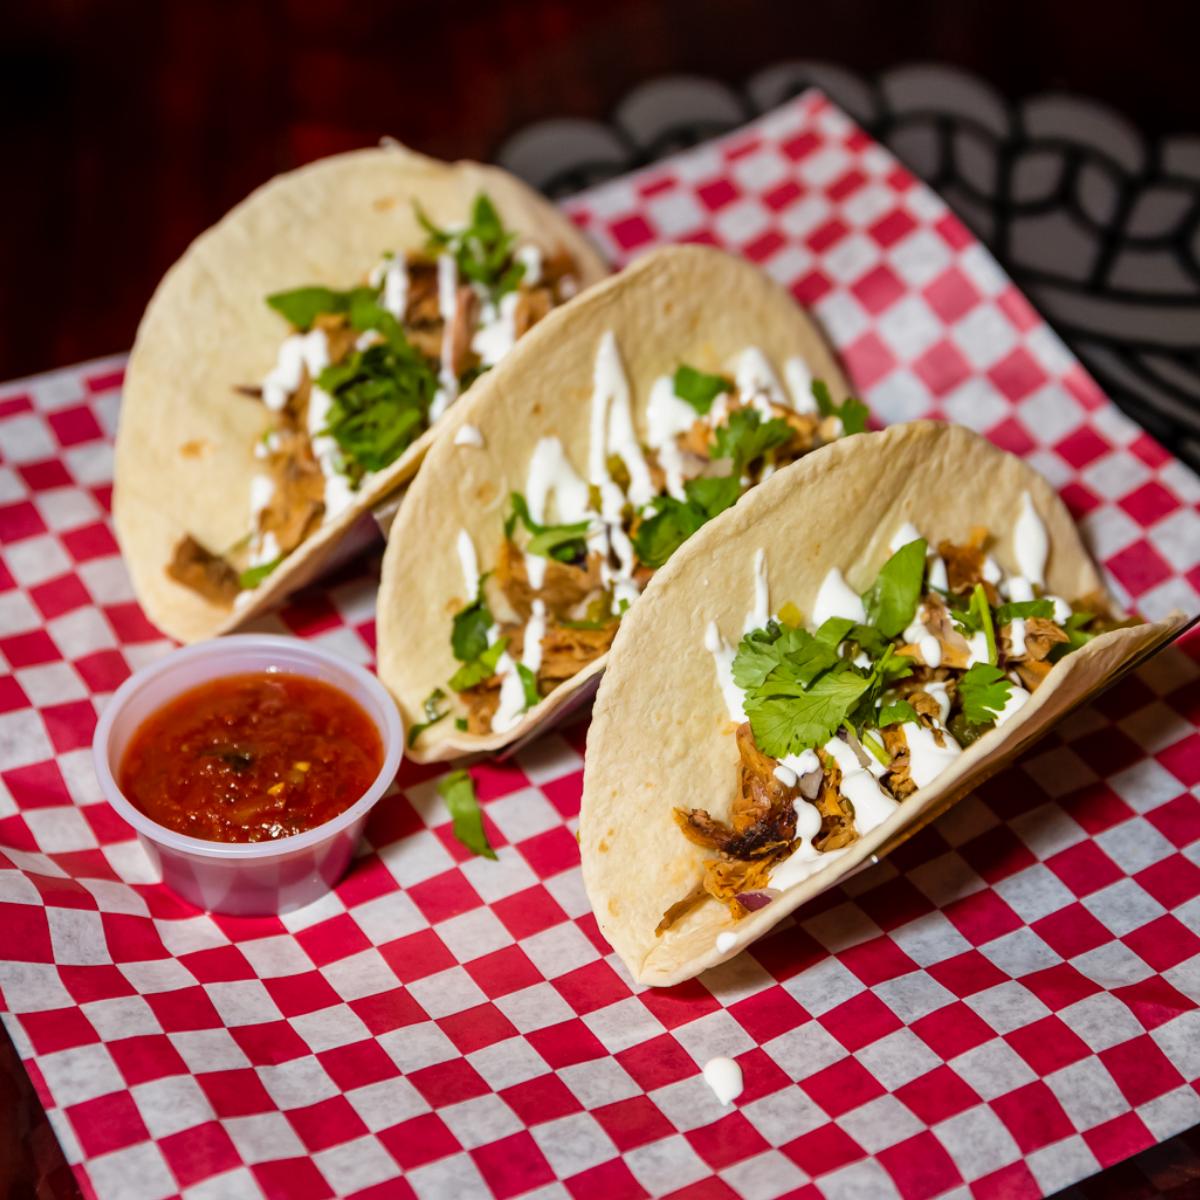 We'll give you something to taco 'bout, Pleasant View!